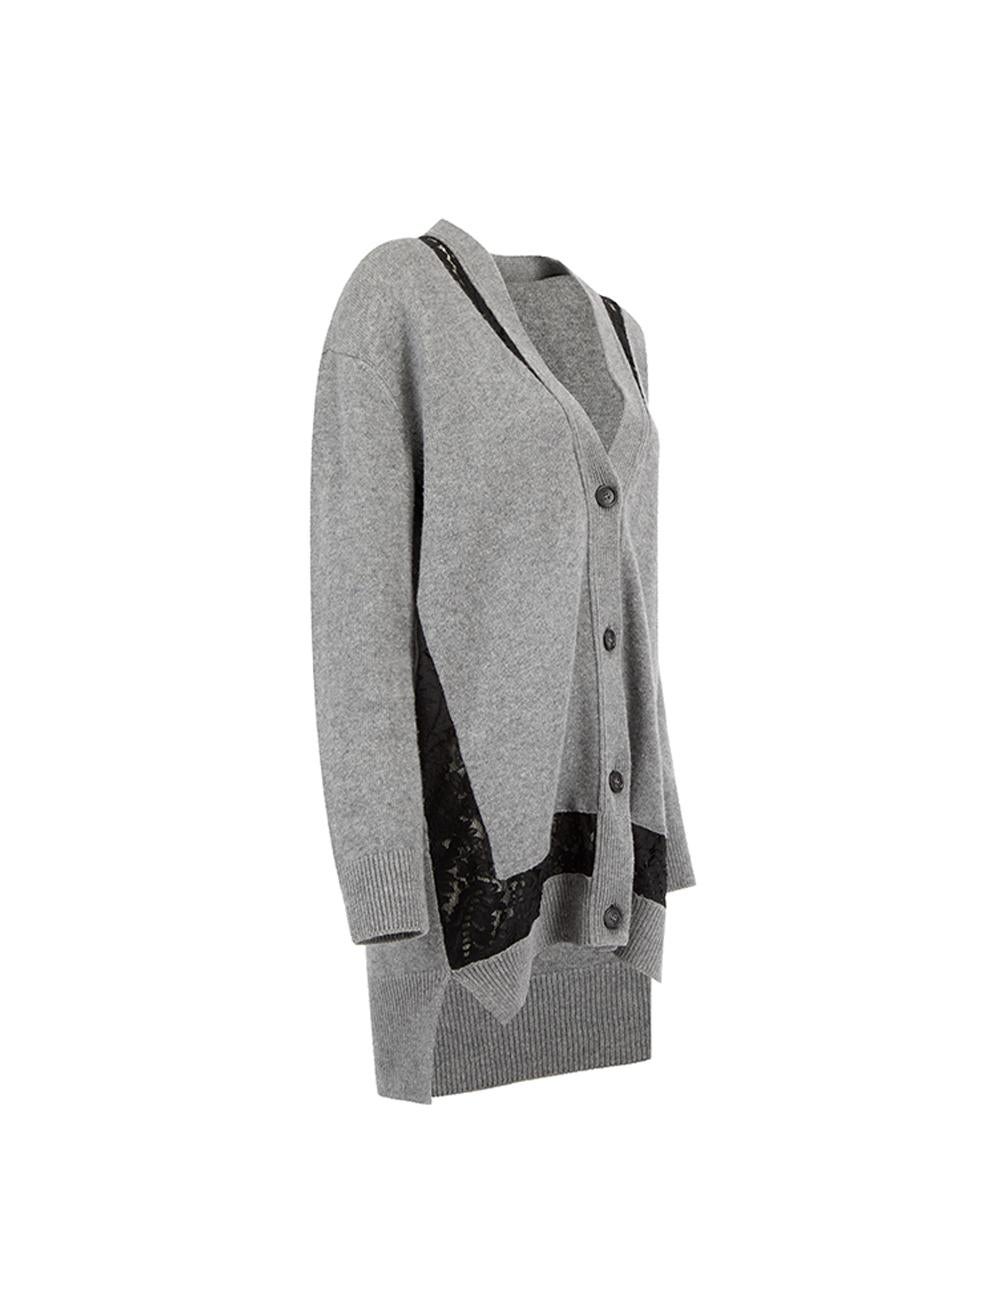 CONDITION is Very good. Minimal wear to cadigan is evident. Minimal wear and pilling to the oute fabric on this used N°21 designer resale item.   Details  Grey Wool Cardigan Black lace trim Button up closure   Composition NO COMPOSITION LABEL BUT